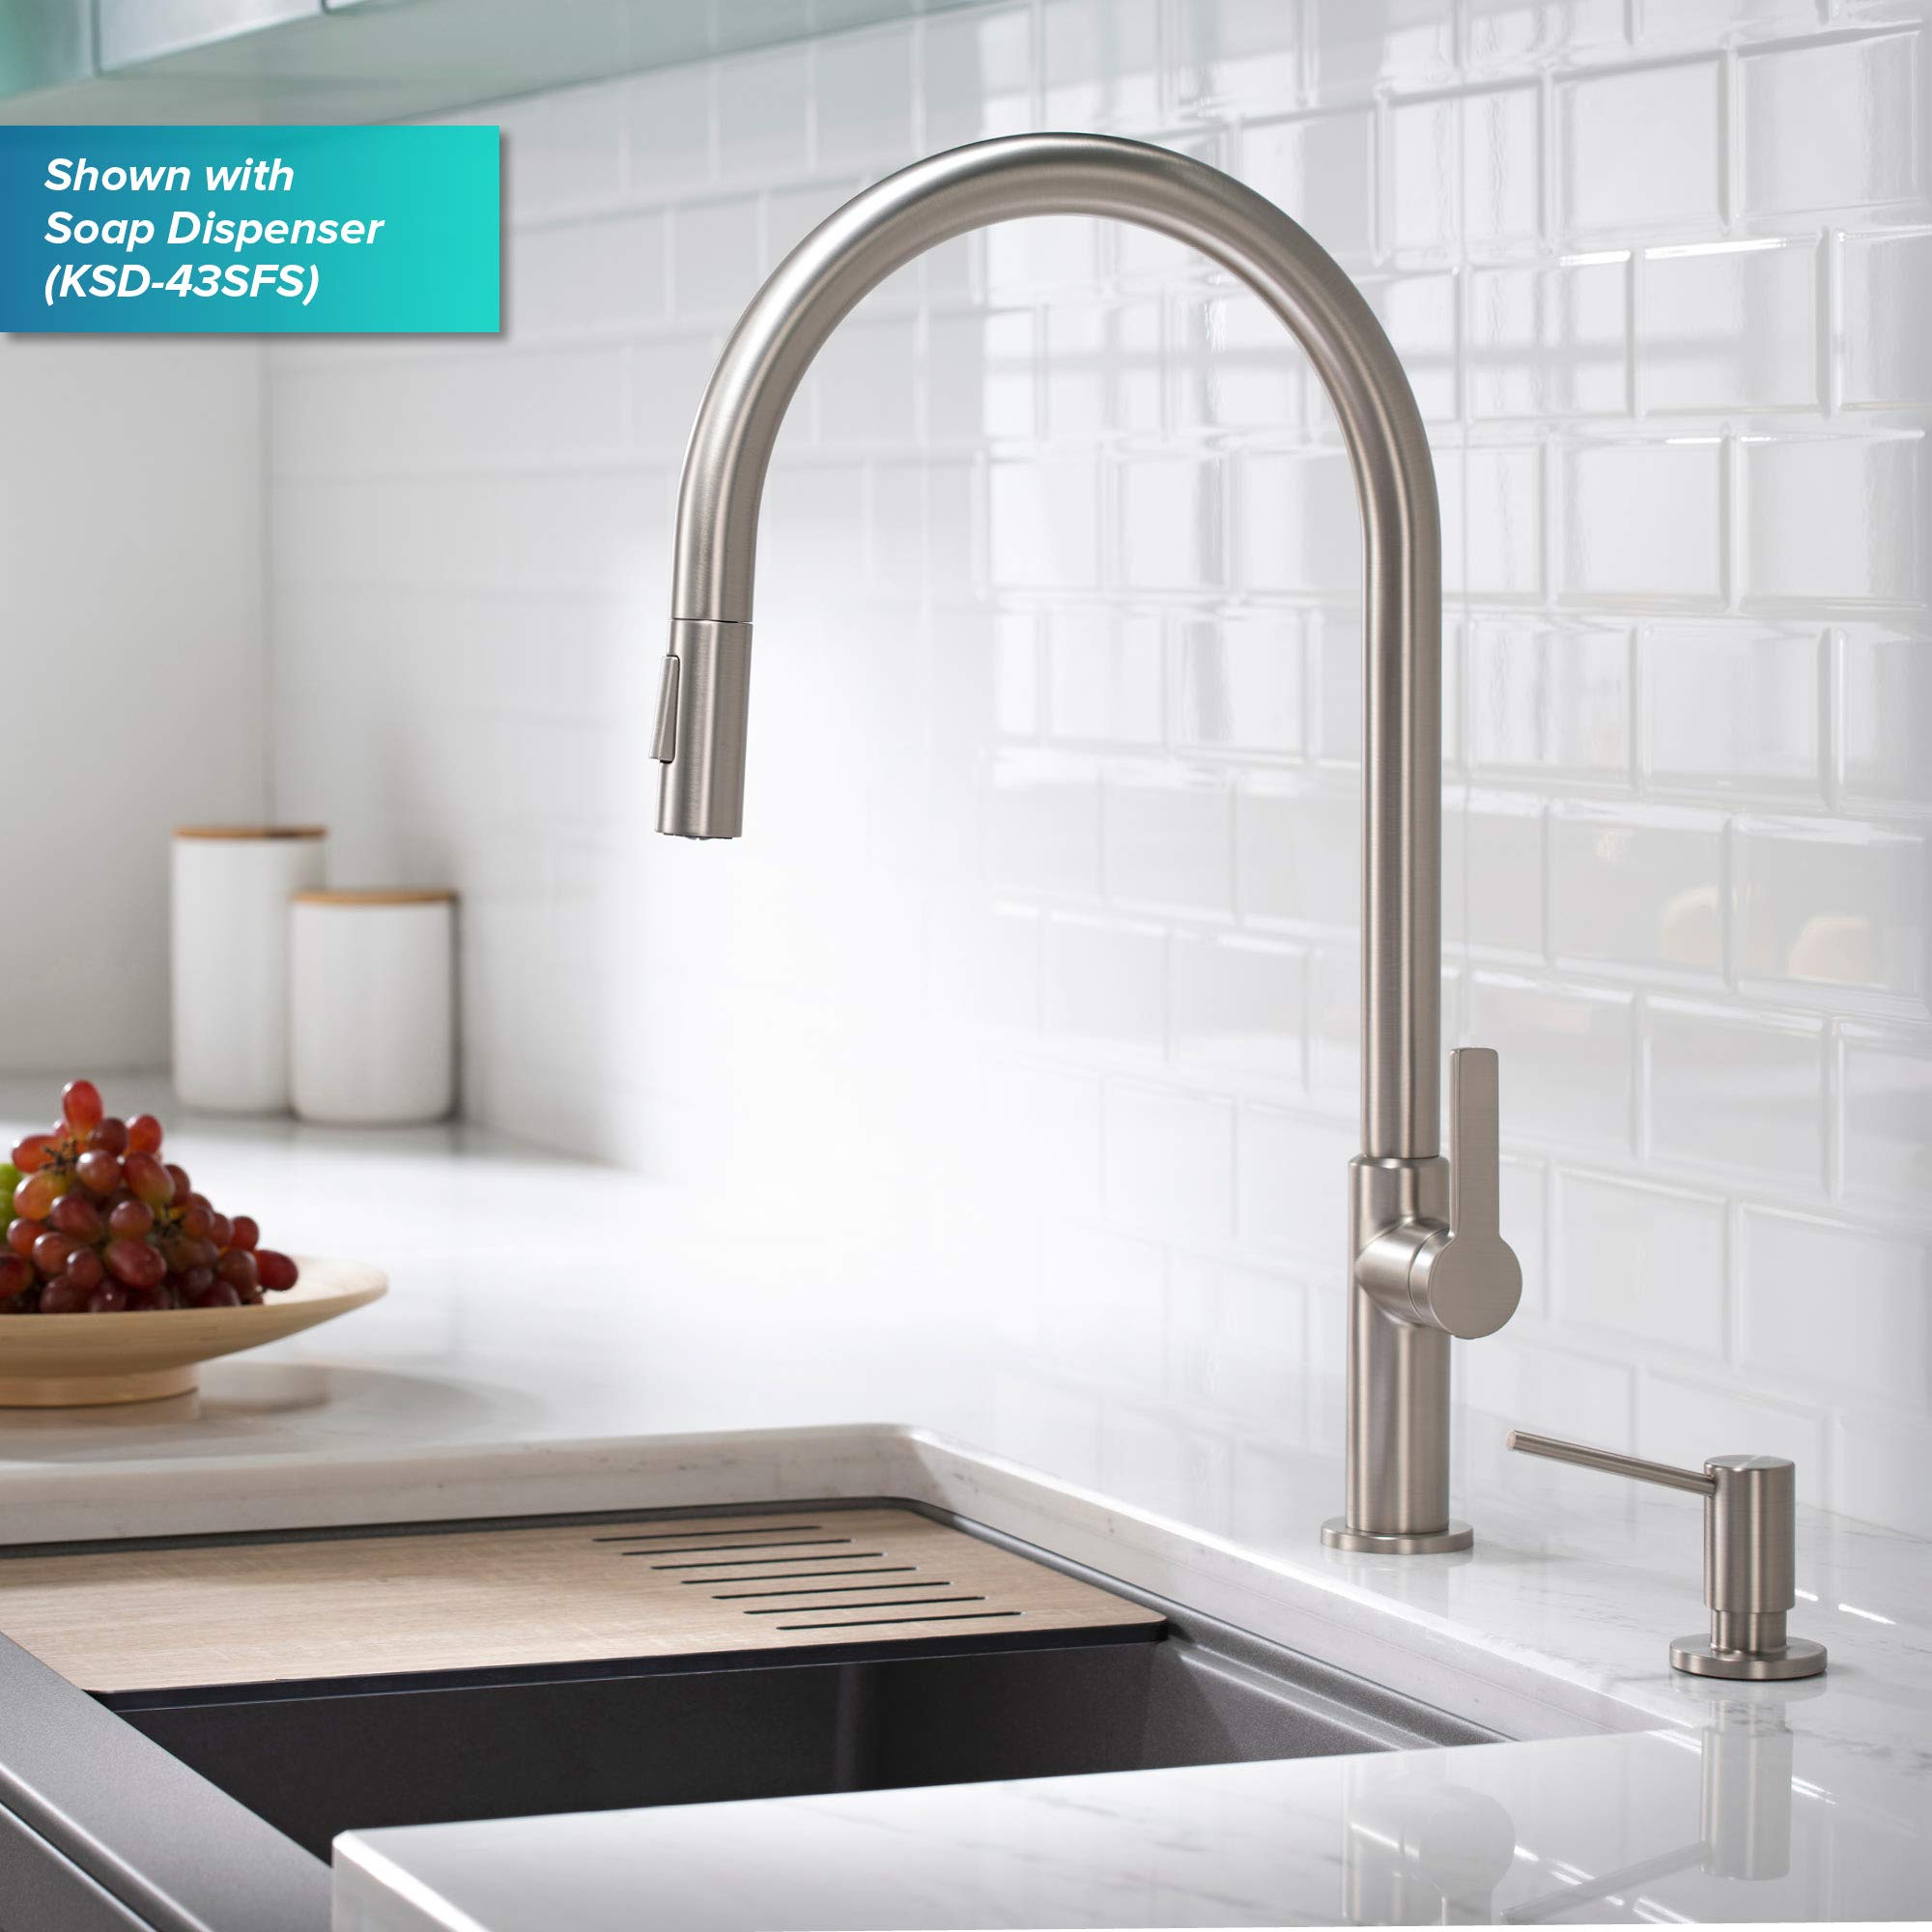 Kraus KPF-2821SFS Oletto High-Arc Single Handle Pull-Down Kitchen Faucet, 21 Inch, Spot Free Stainless Steel